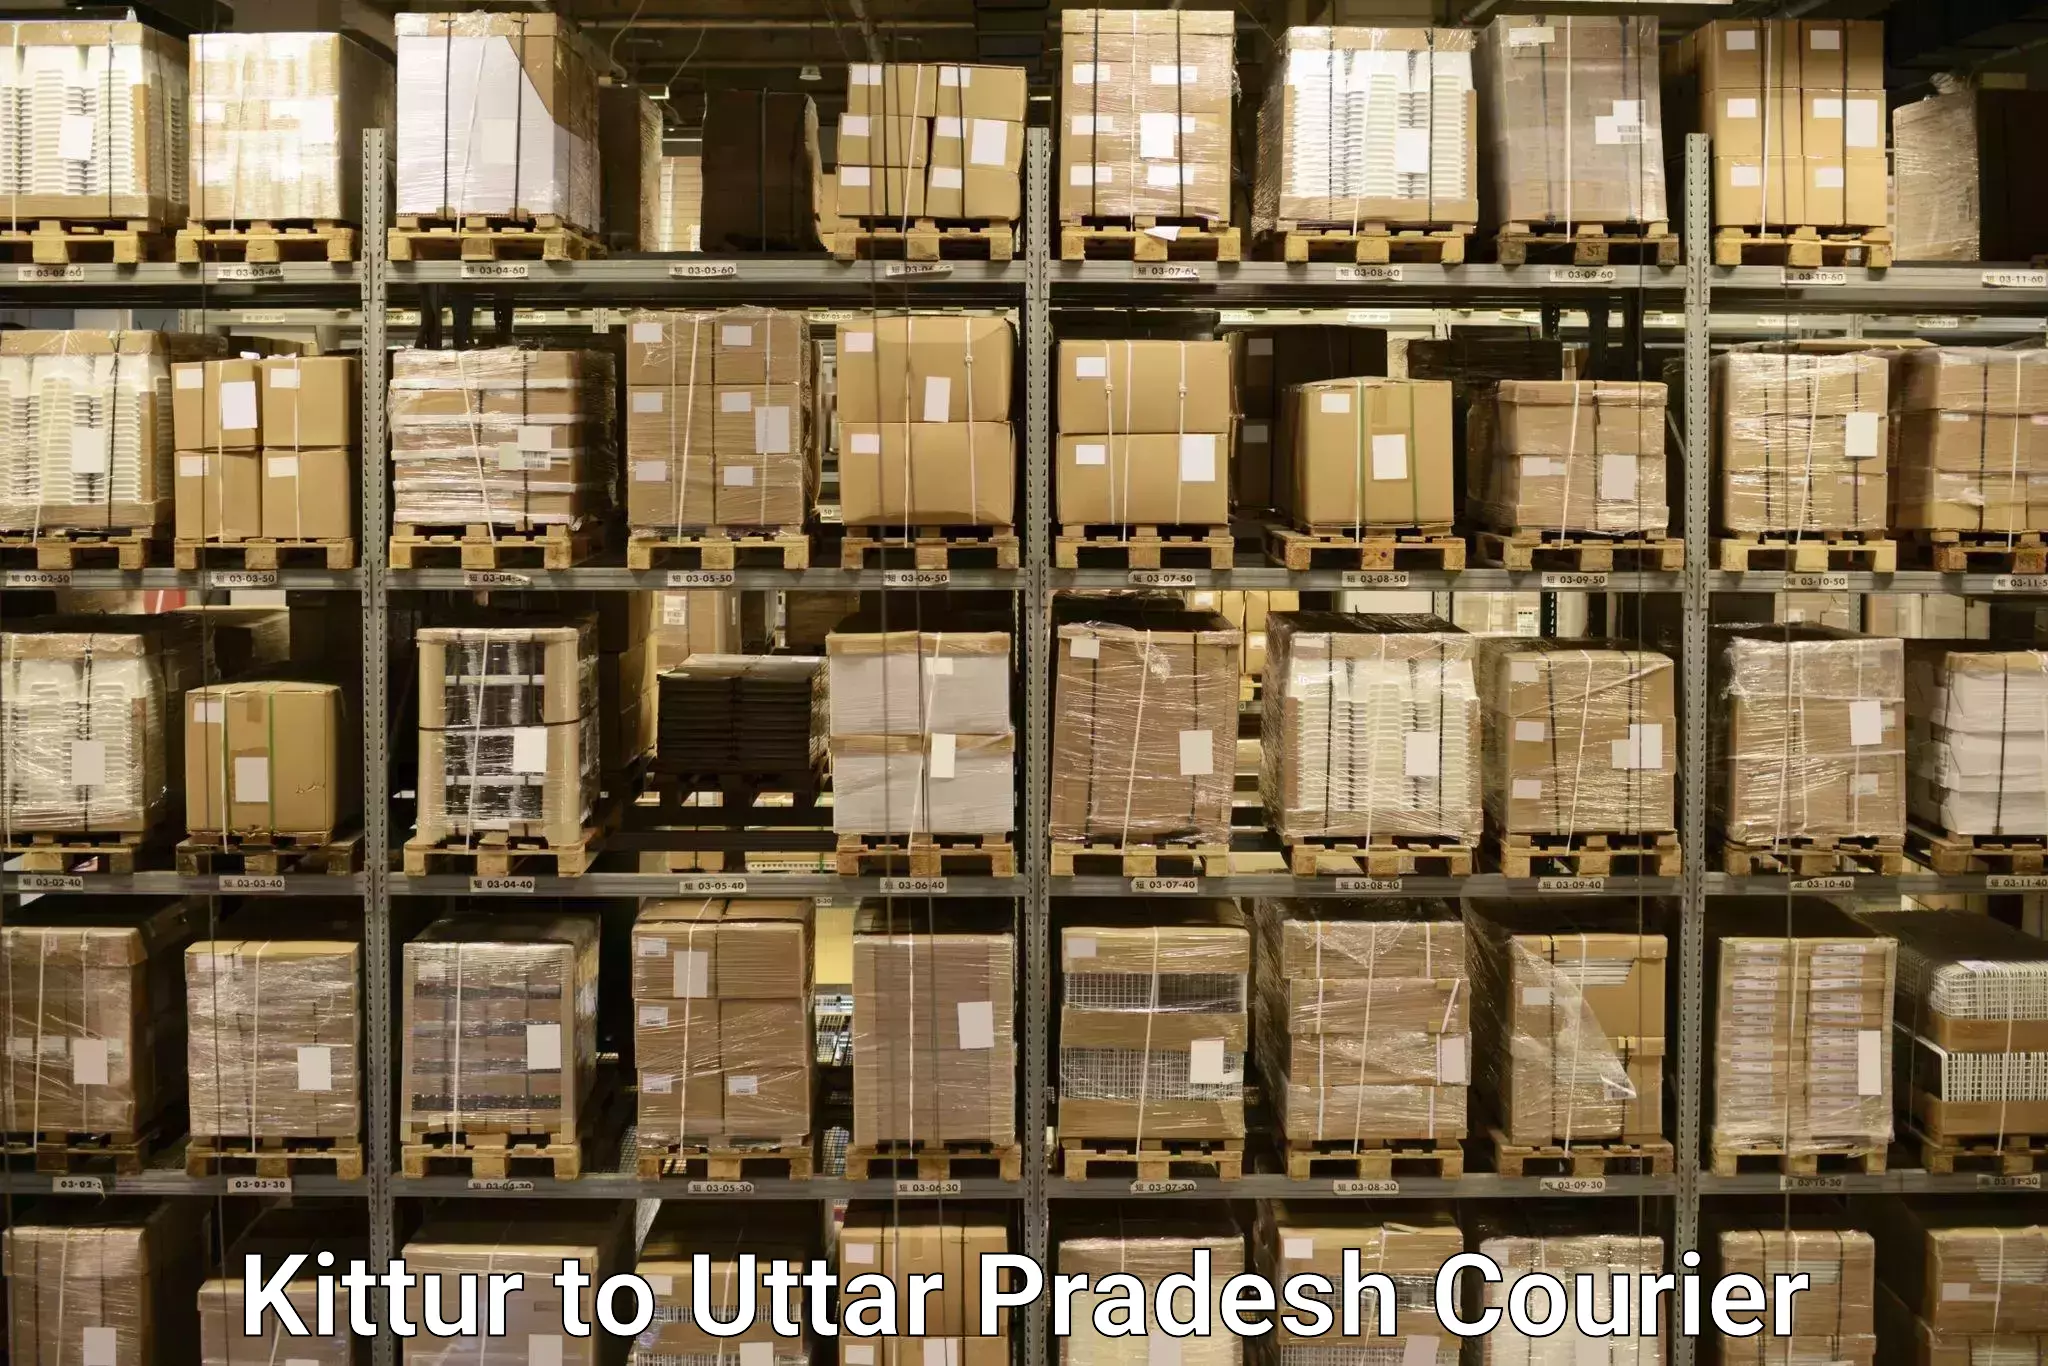 Luggage delivery app Kittur to Agra